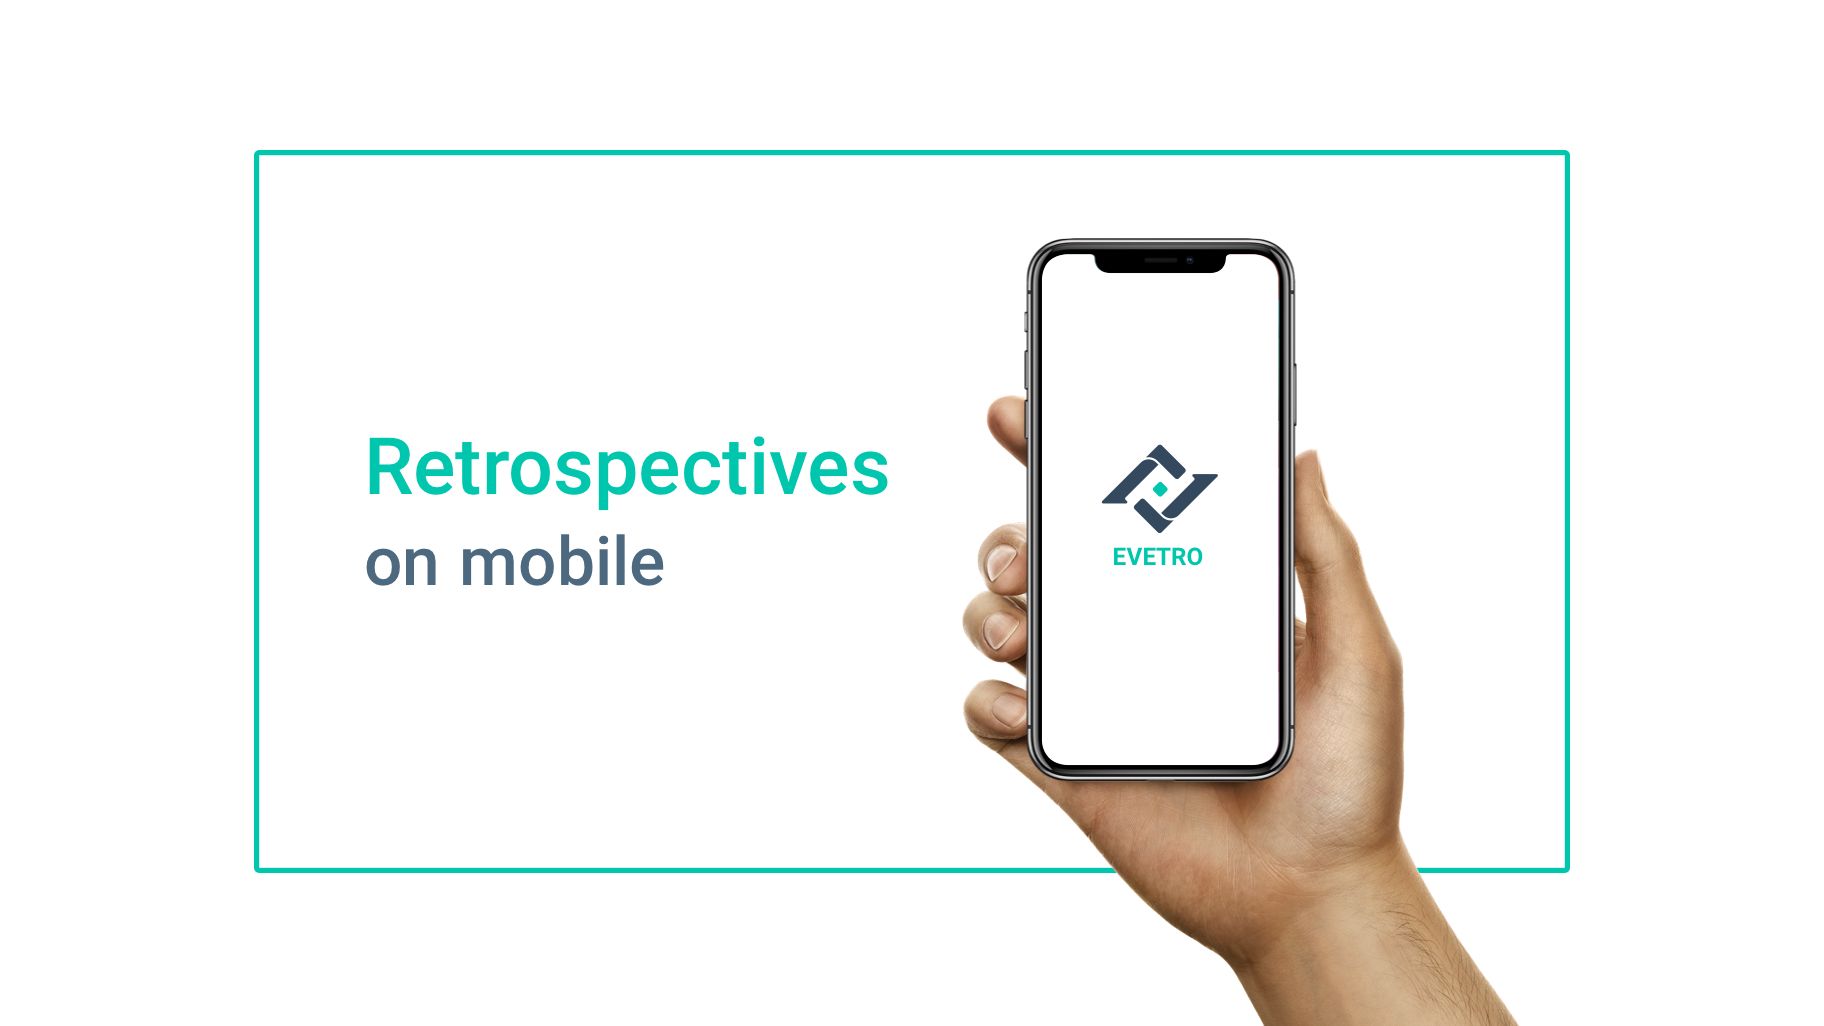 Run retrospectives with your mobile device